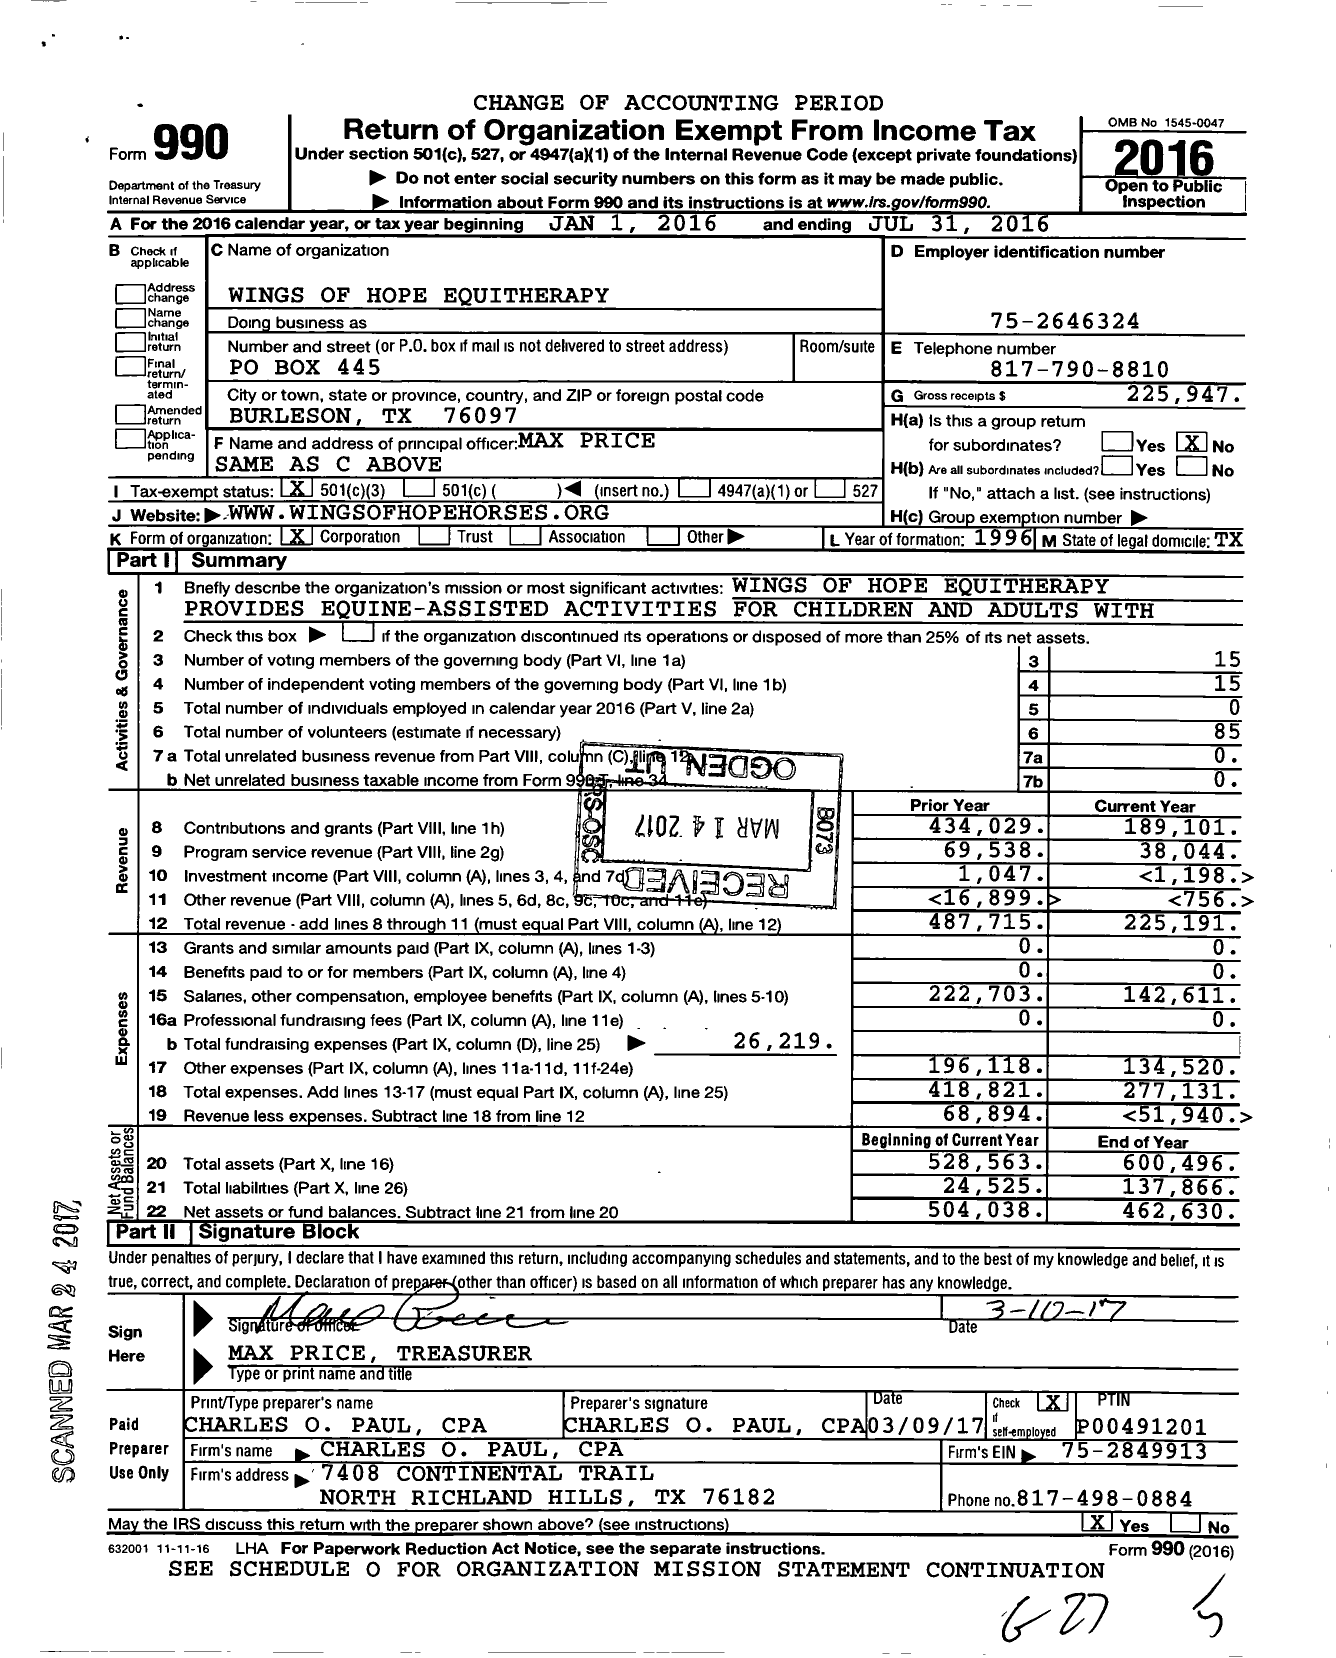 Image of first page of 2015 Form 990 for Wings of Hope Equitherapy